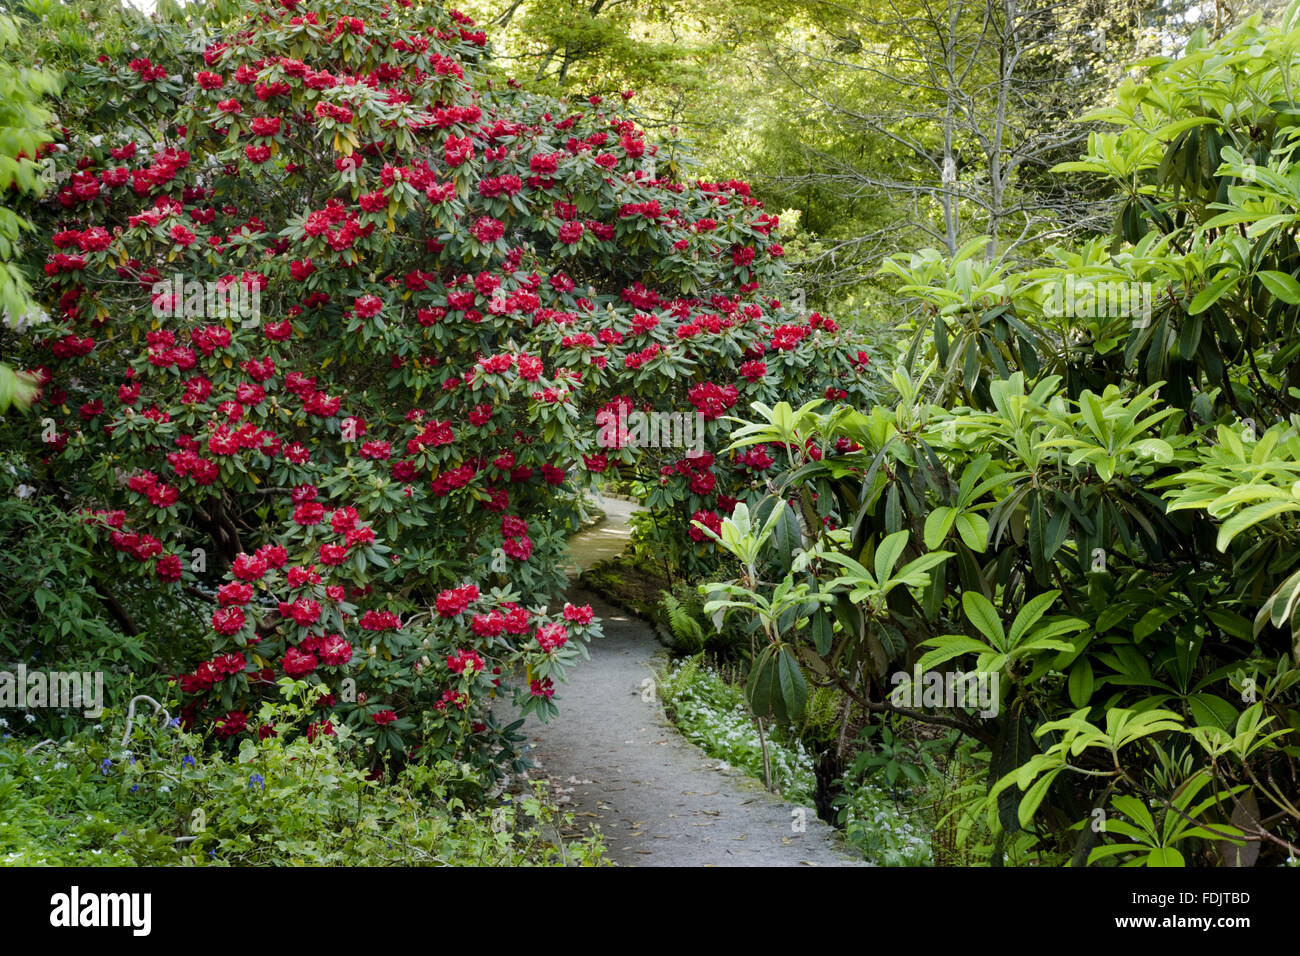 Rhododendron in flower at Trelissick Garden, Cornwall, in May. Stock Photo